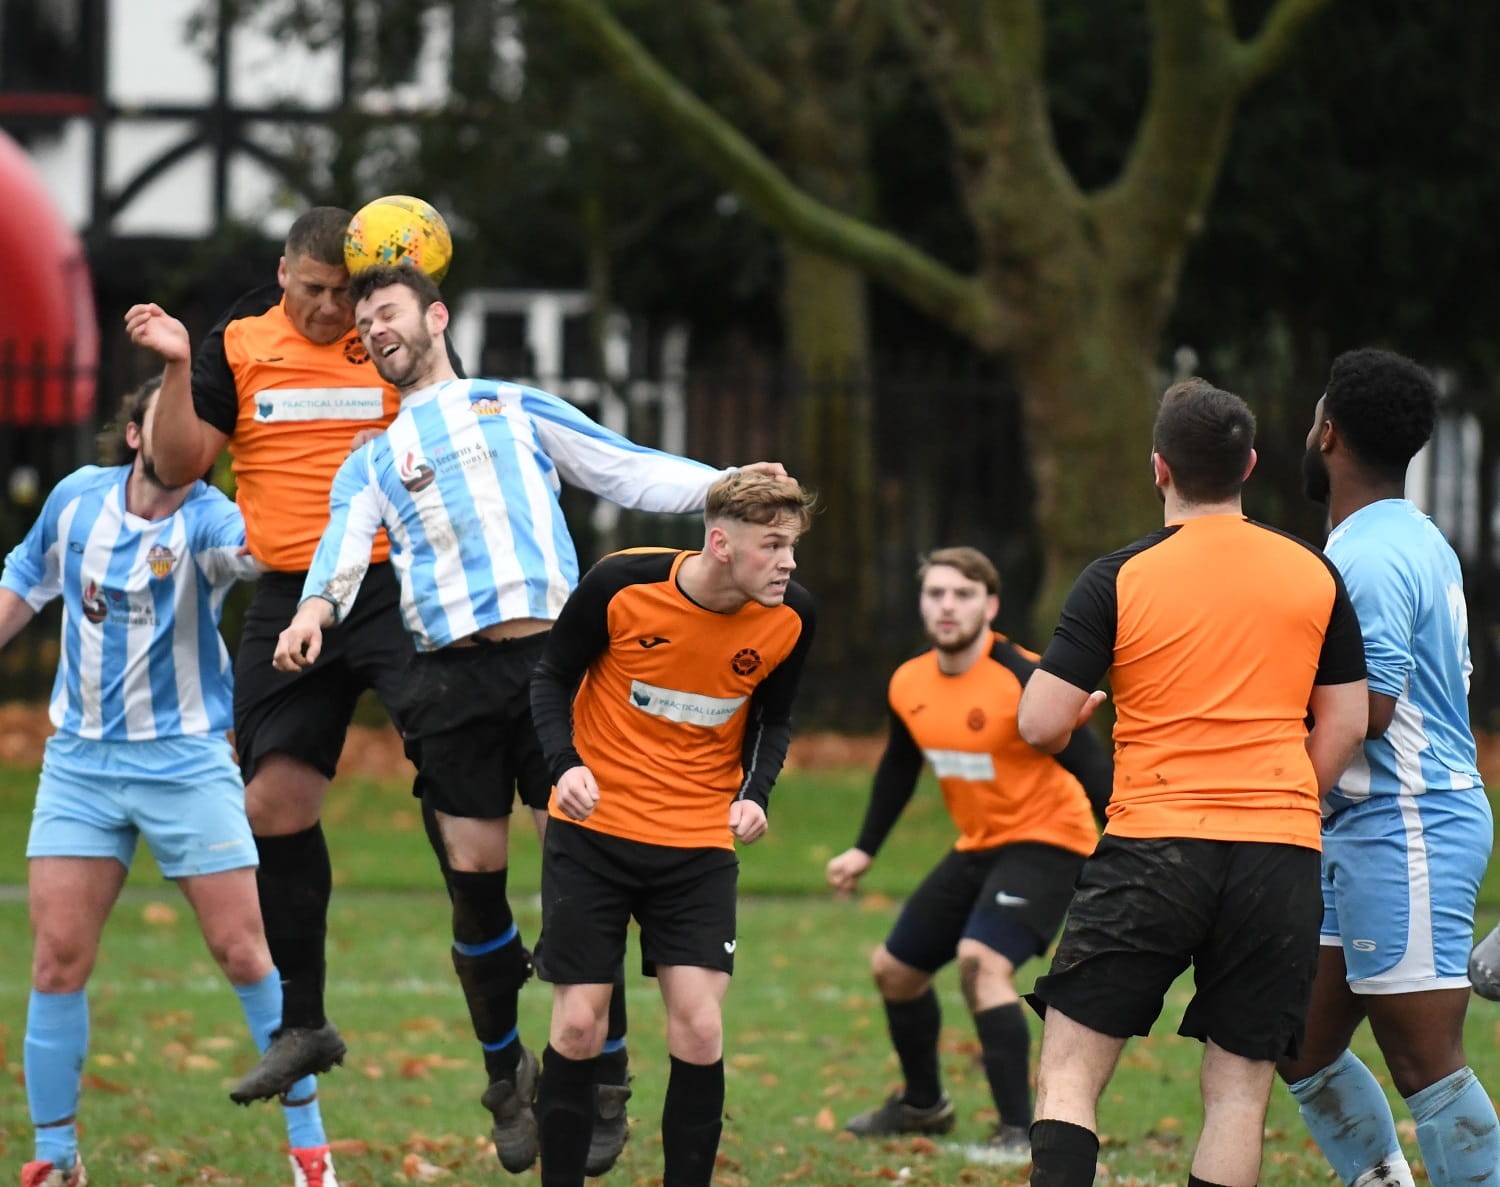 WEEK 14 REVIEW: Round-up of all the league and cup action from the weekend